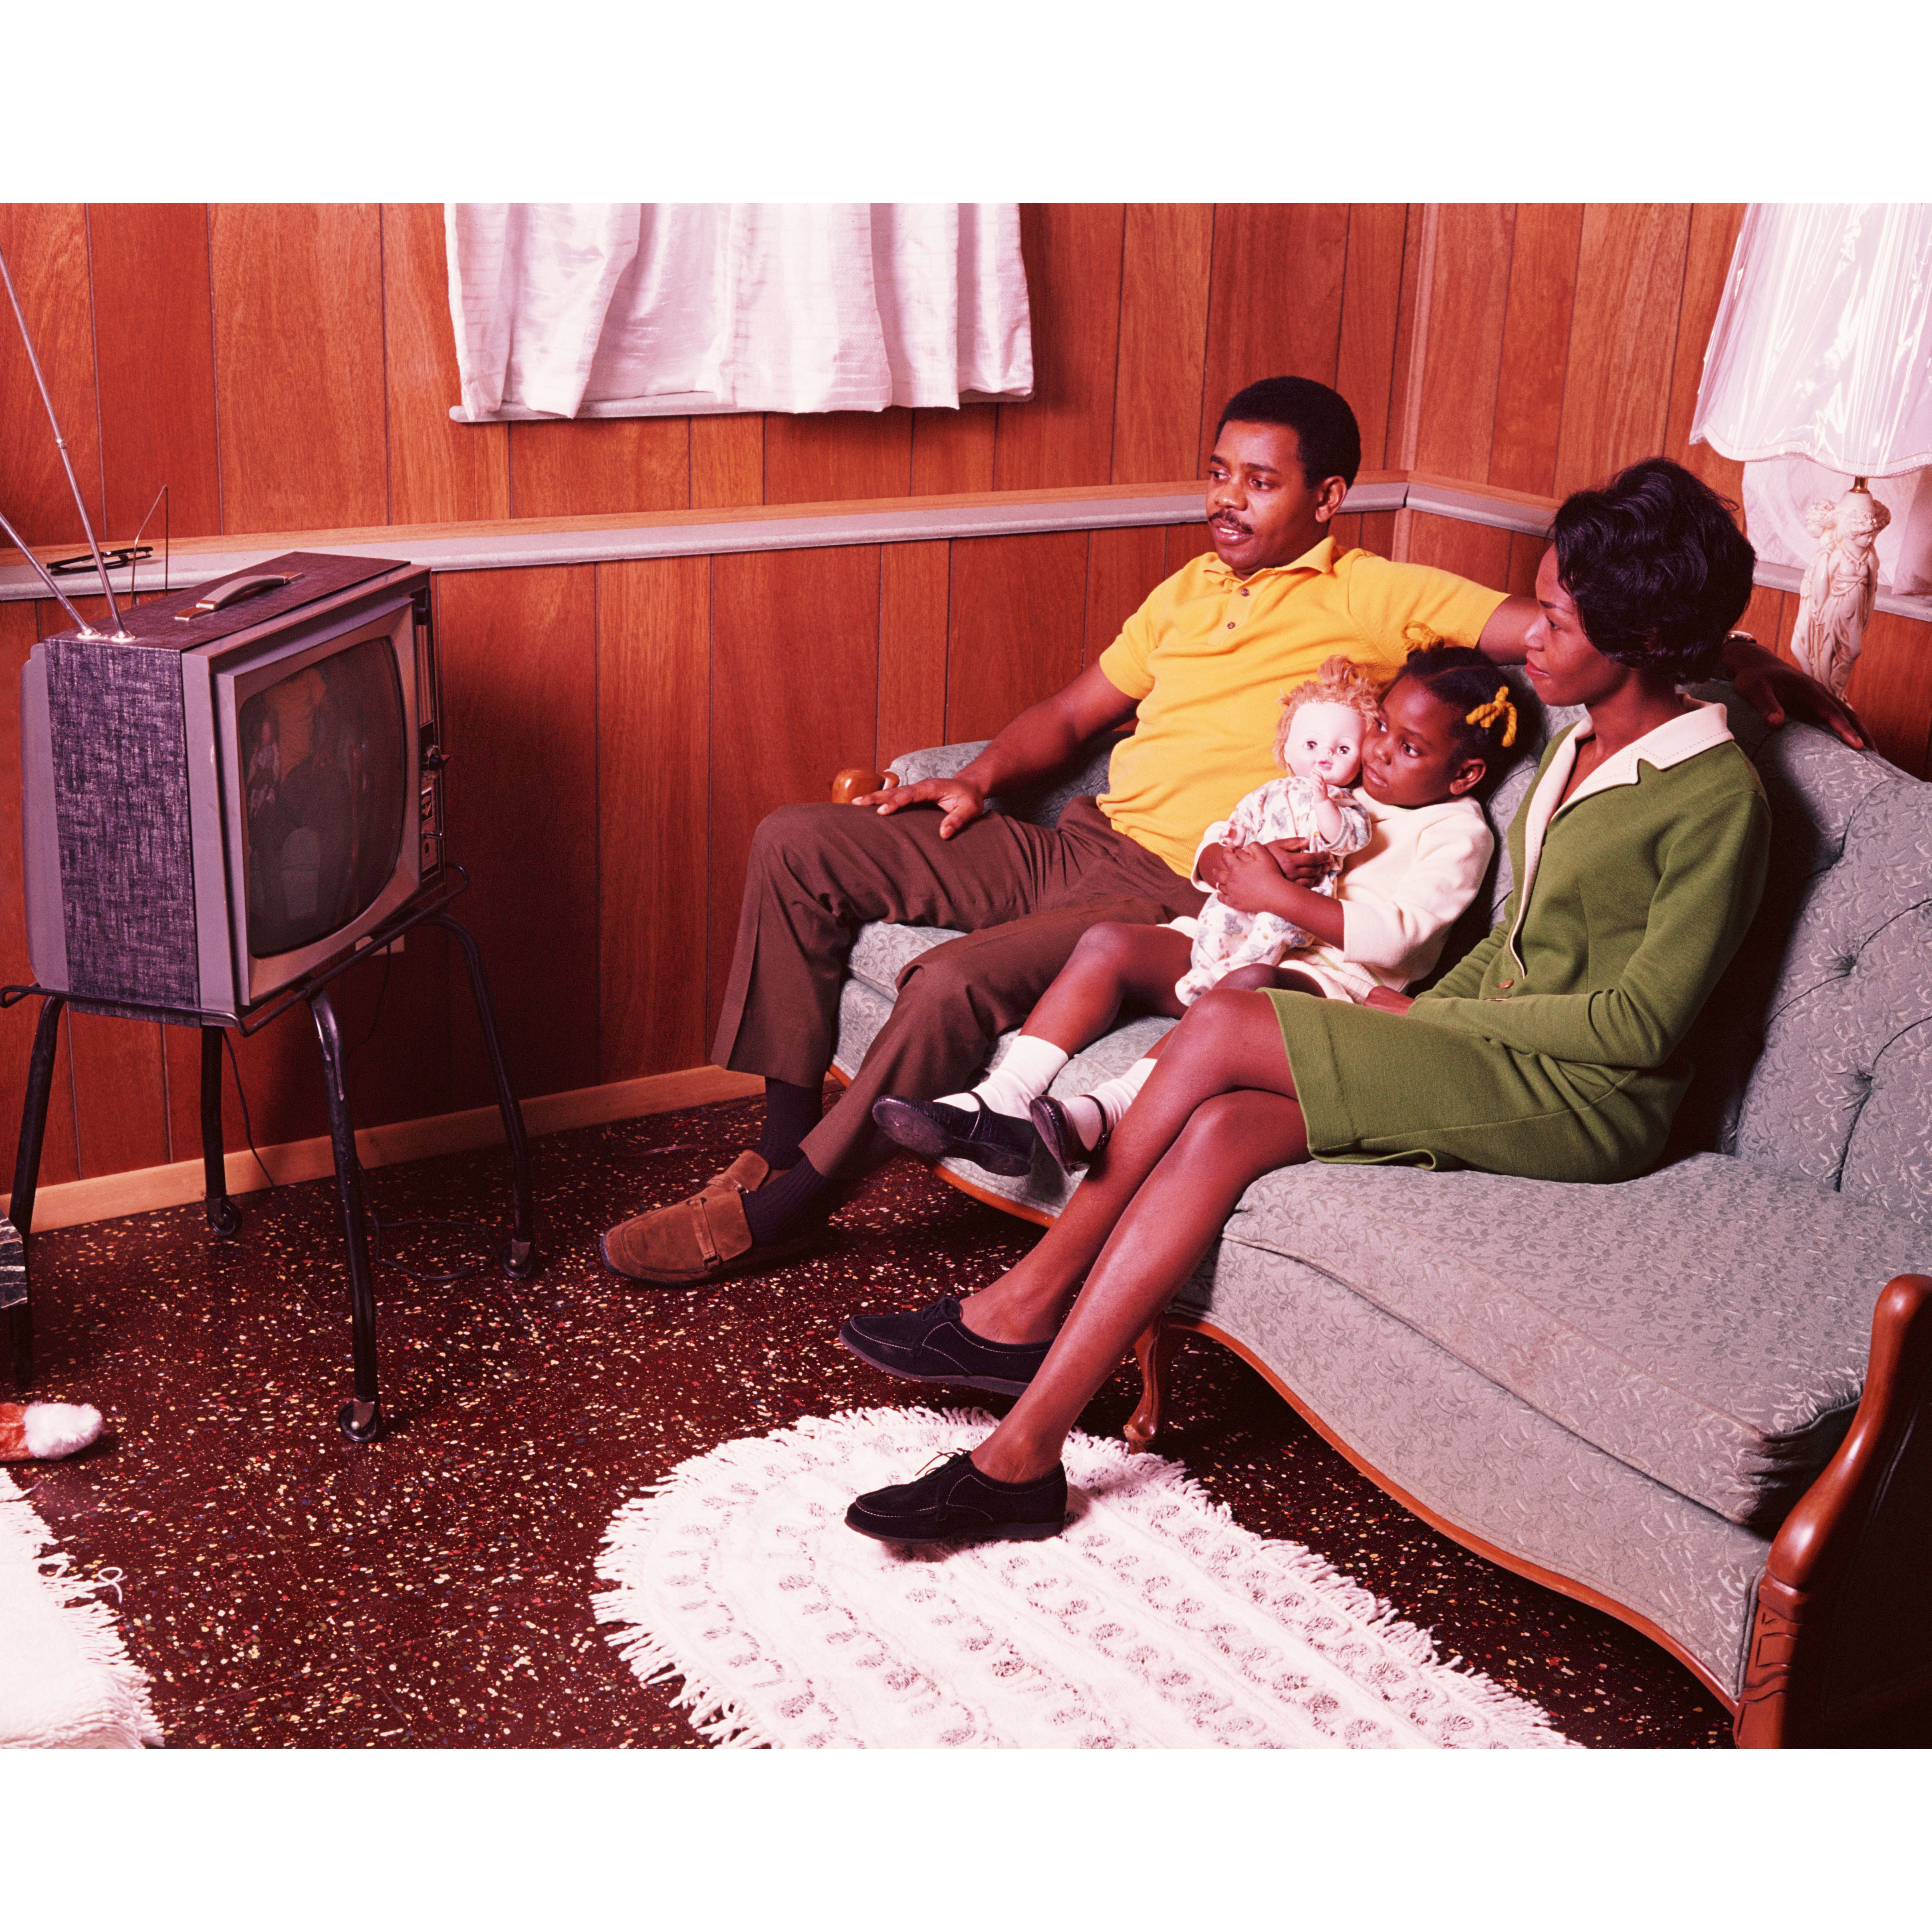 #TBT: 22 Vintage Photos of Black Families To Get You Ready For Your Next Family Reunion
